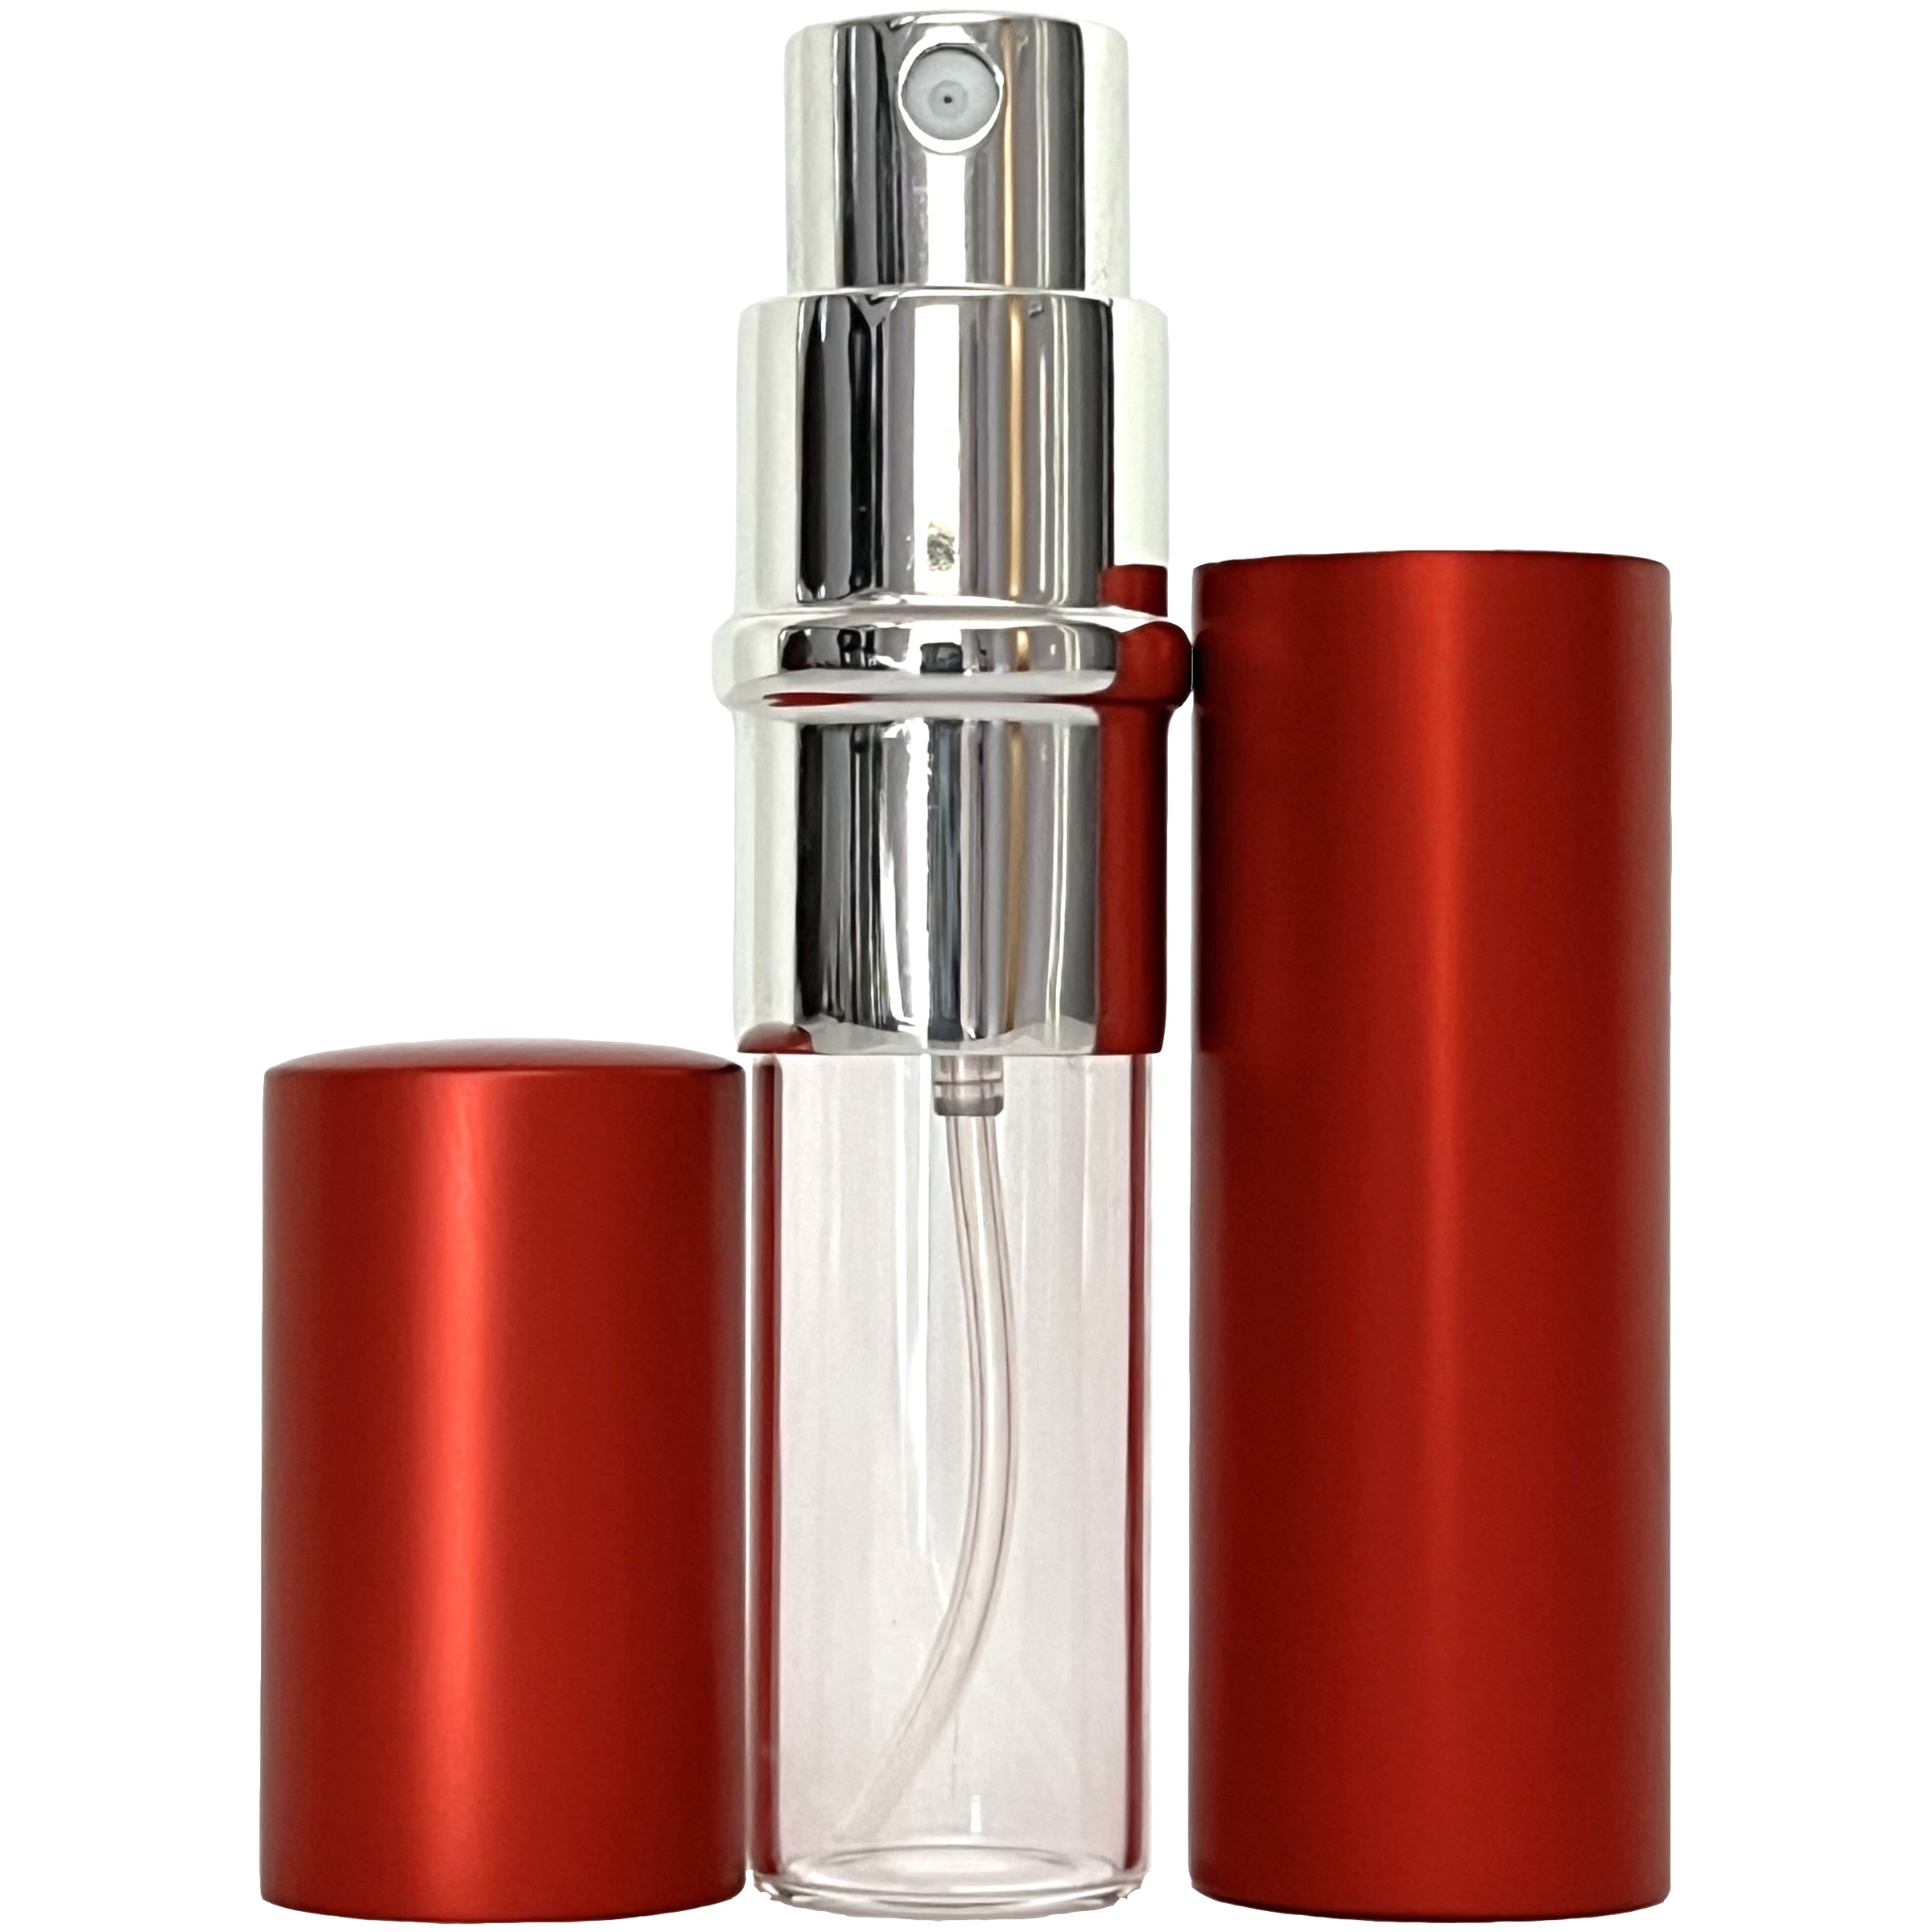 6ml 0.2oz Red Perfume Glass Spray Deluxe Bottles Silver Atomizers